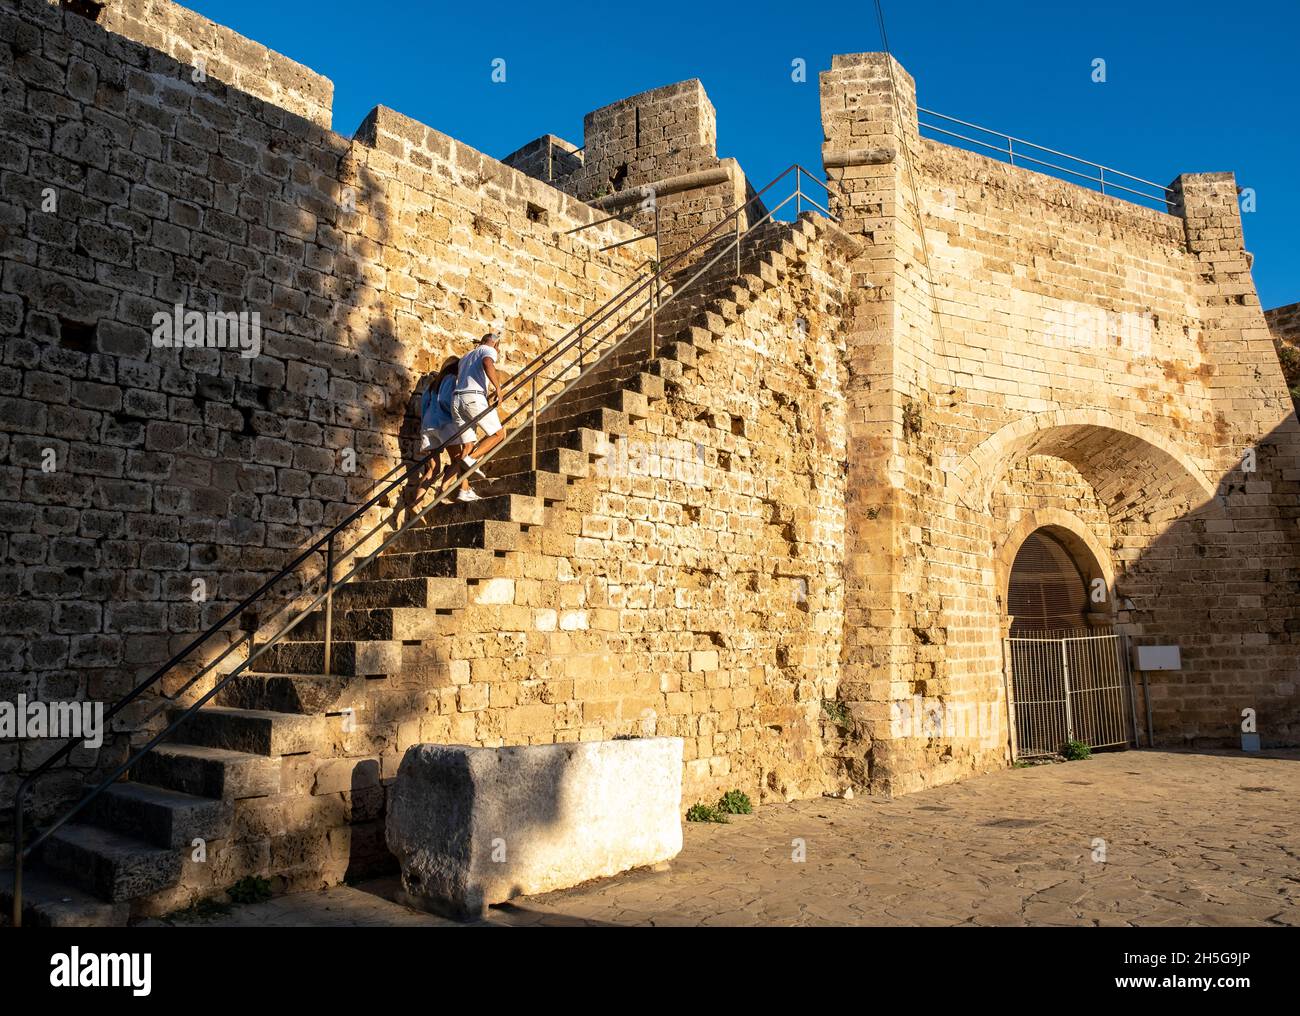 Seagate entrance on the Venetian Walls in the old city of Famagusta (Gazimagusa) in the Turkish Republic of Northern Cyprus Stock Photo